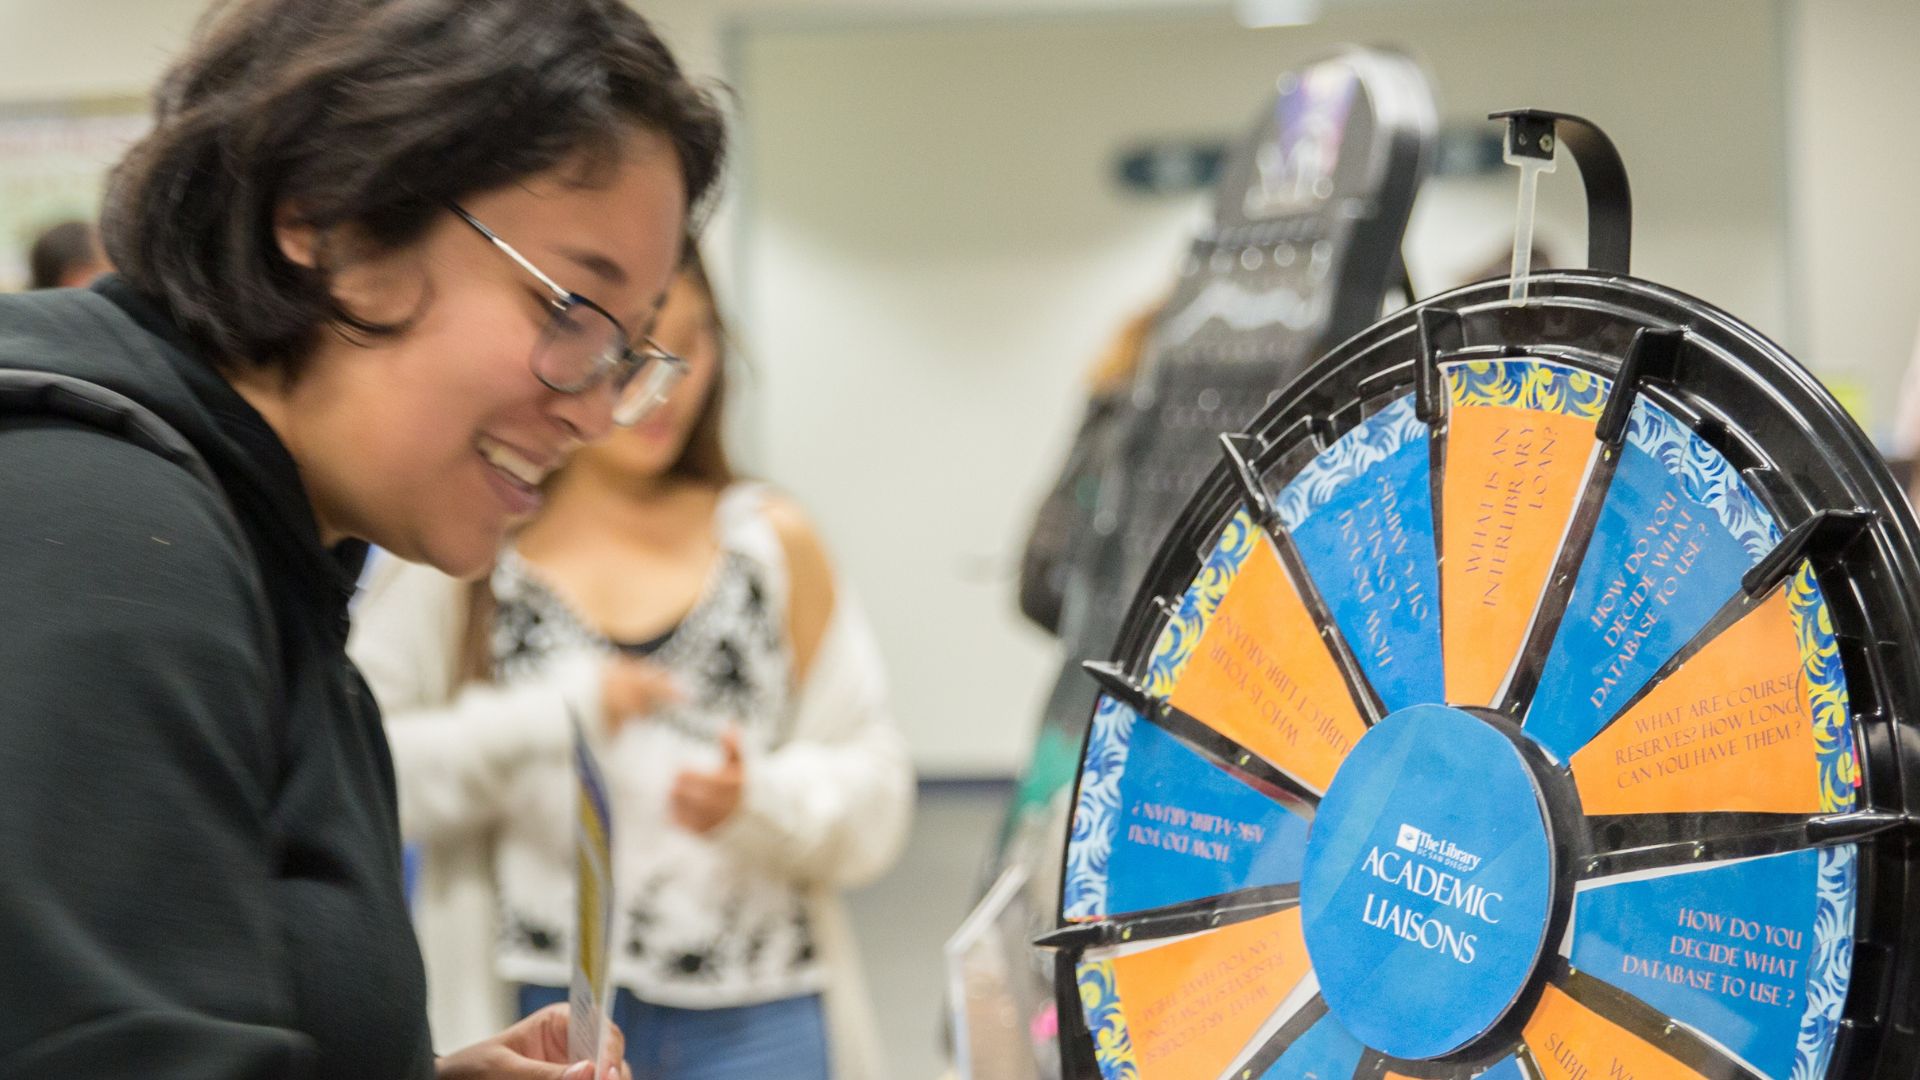 A student at Geisel Library engaging with a spinning wheel to win a prize.